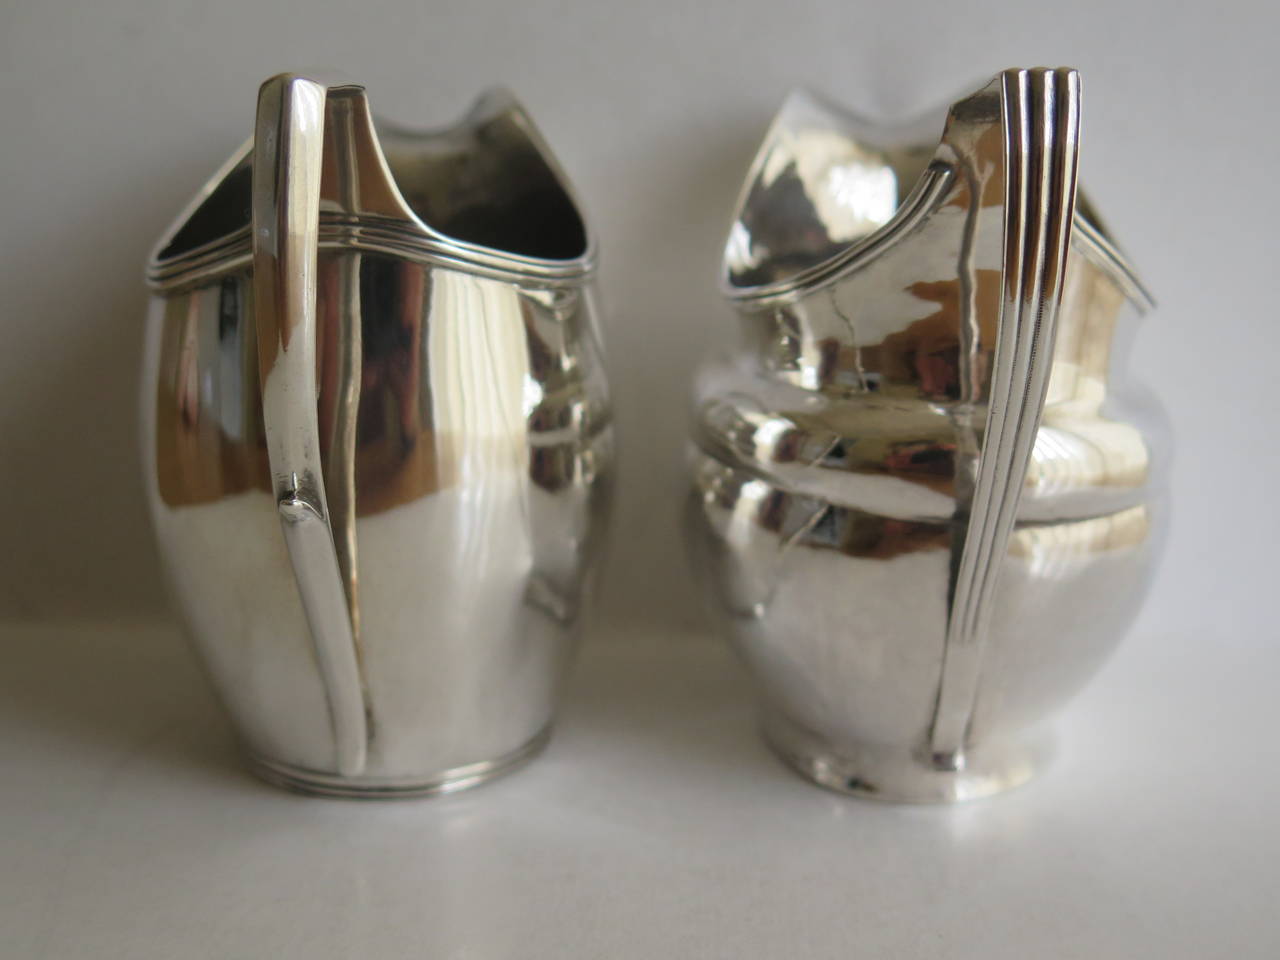 19th Century TWO Georgian, Sterling Silver, Milk or Cream Jugs, London Makers, 1801 and 1805